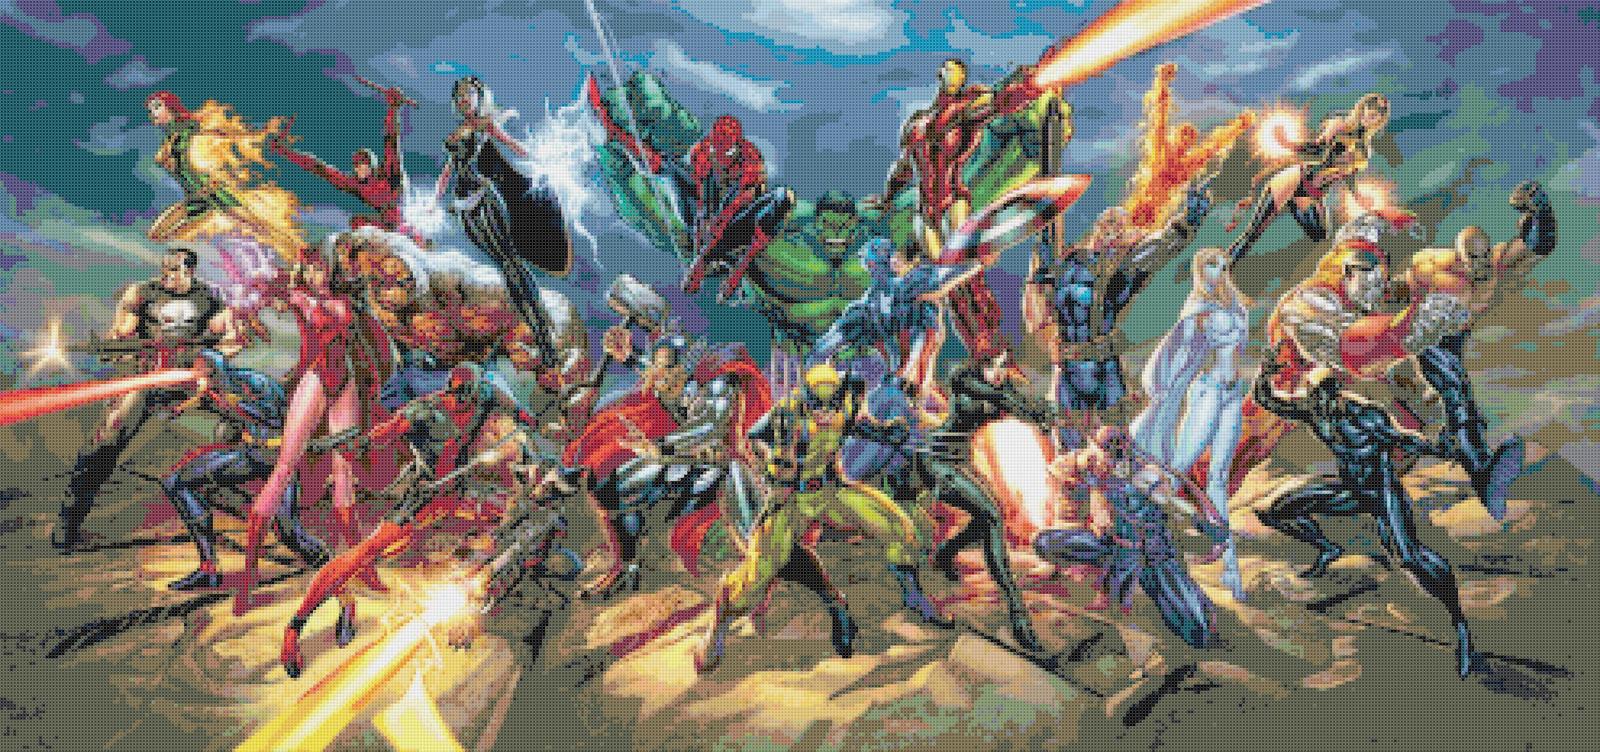 Counted Cross stitch pattern Marvel all characters 496*233 stitches BN815